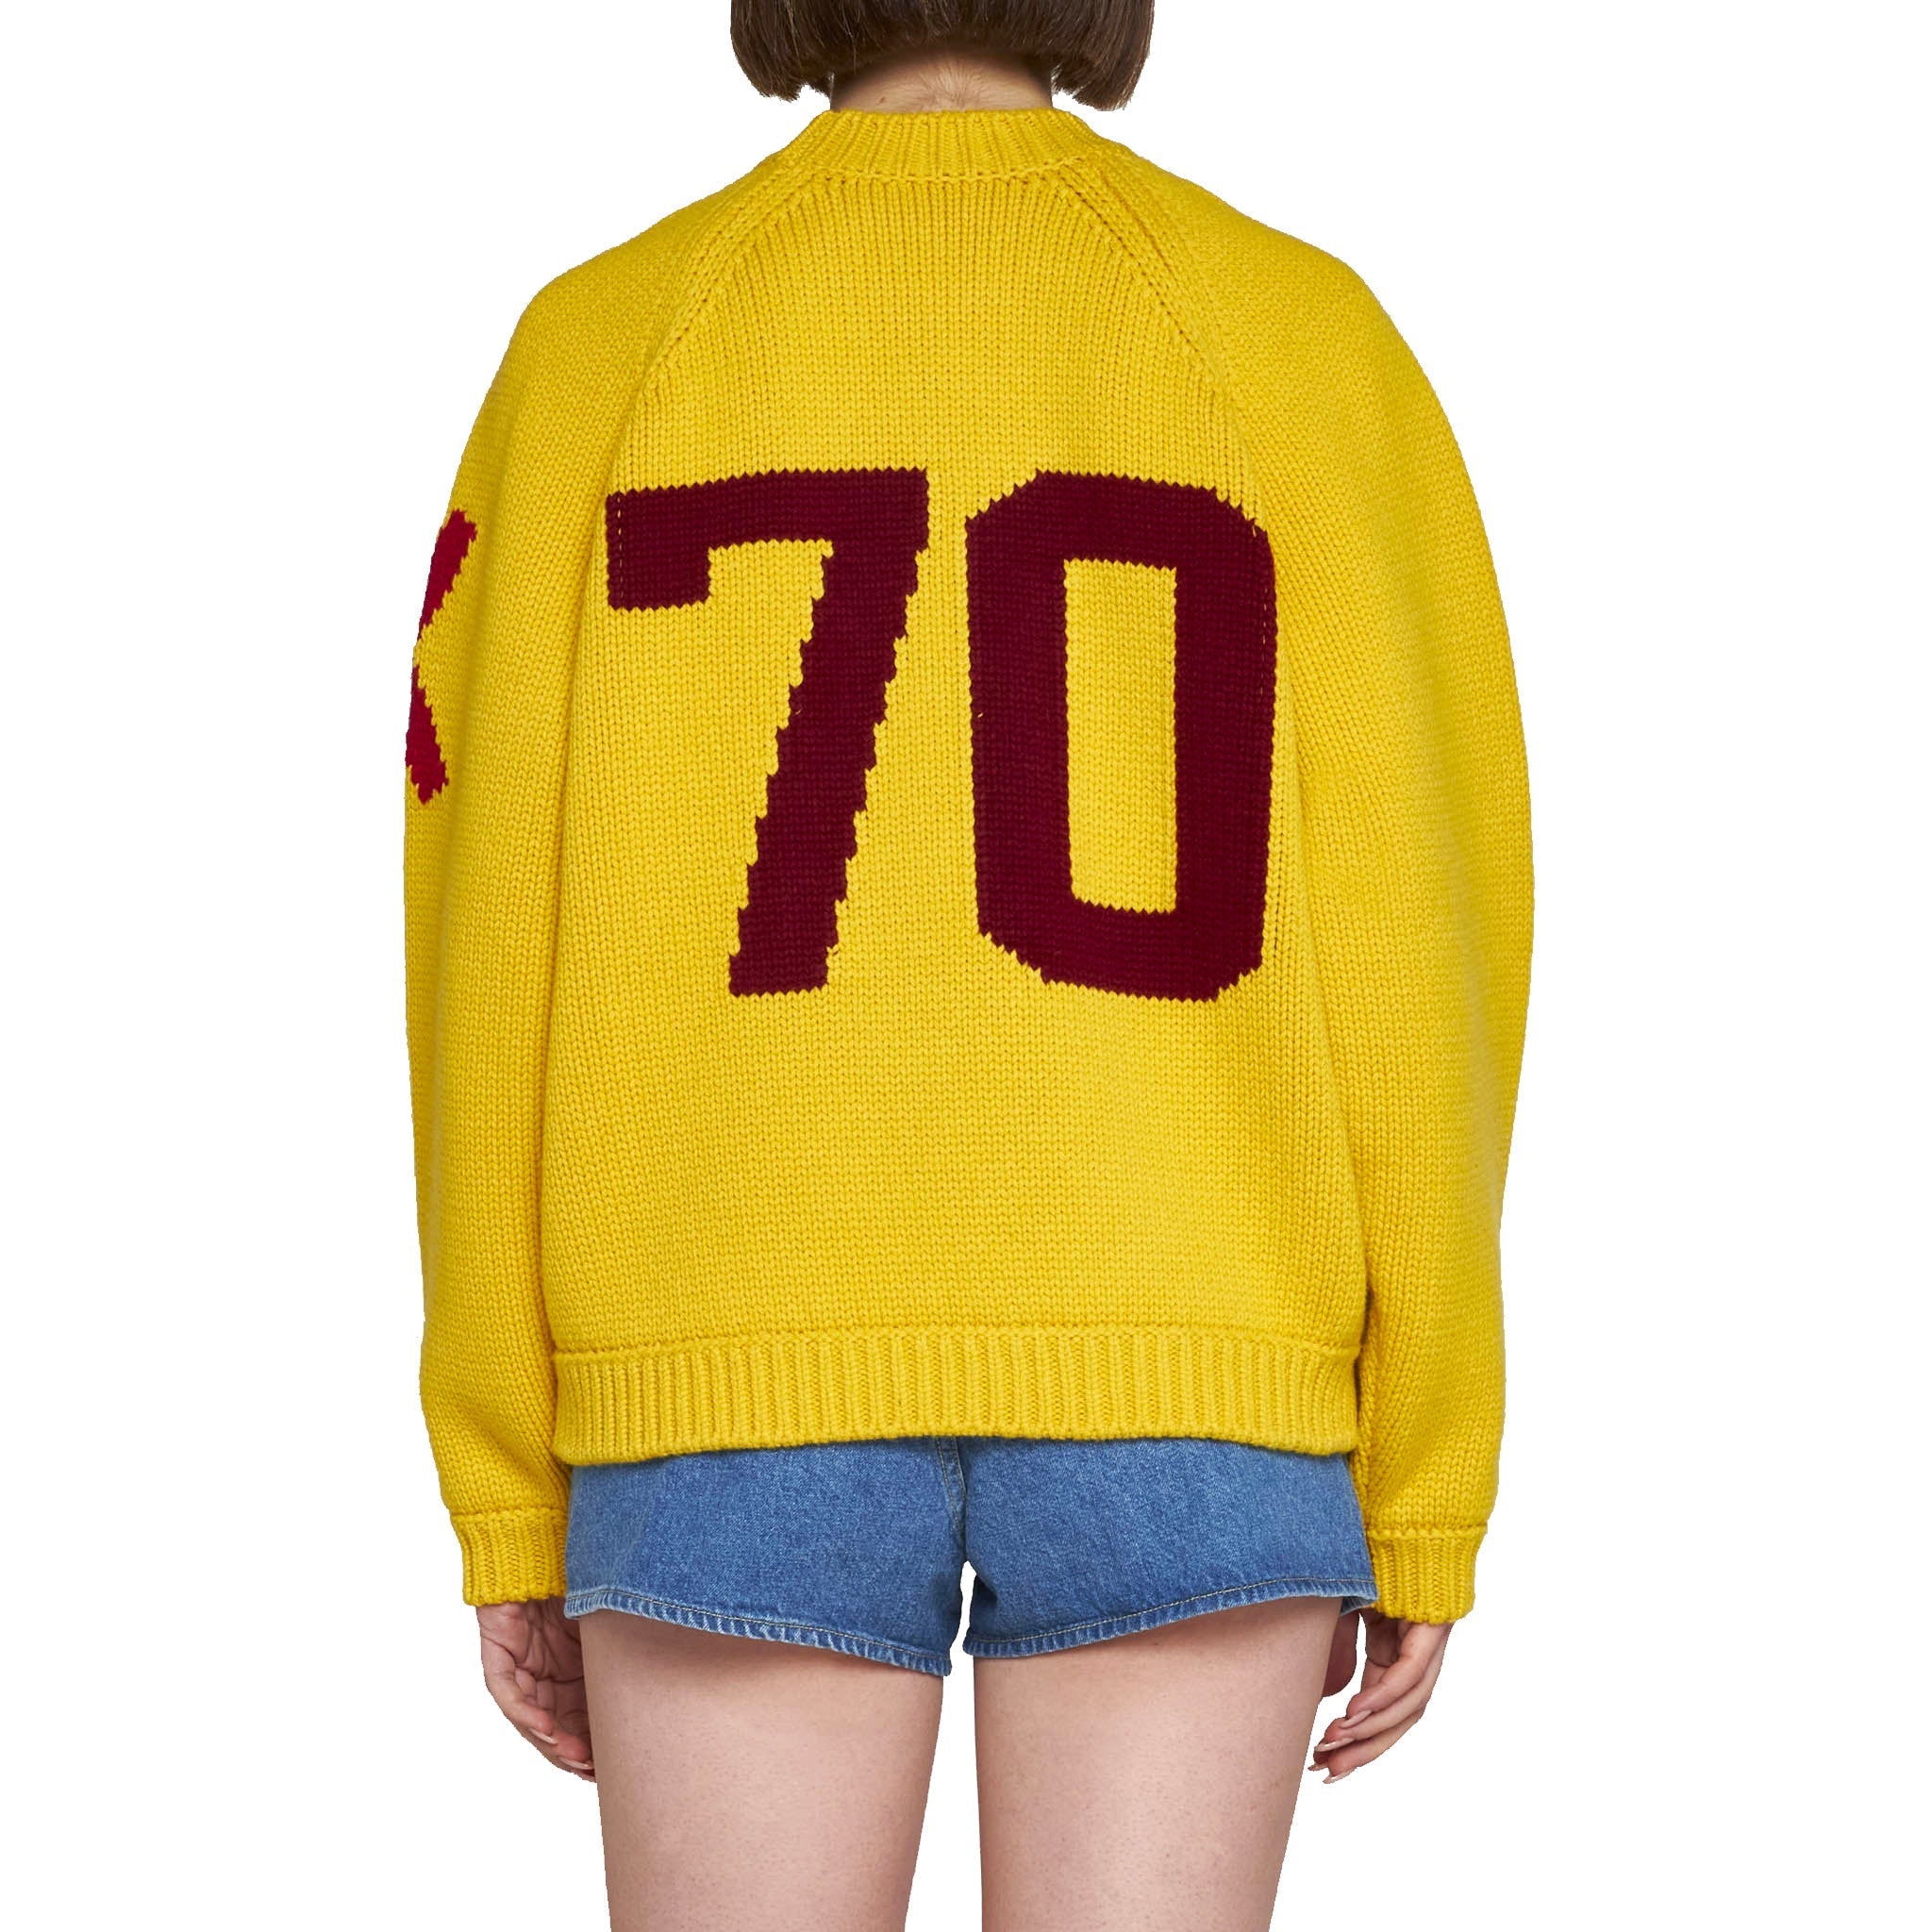 KENZO-OUTLET-SALE-Kenzo-Cotton-Pullover-Strick-YELLOW-M-ARCHIVE-COLLECTION-3.jpg